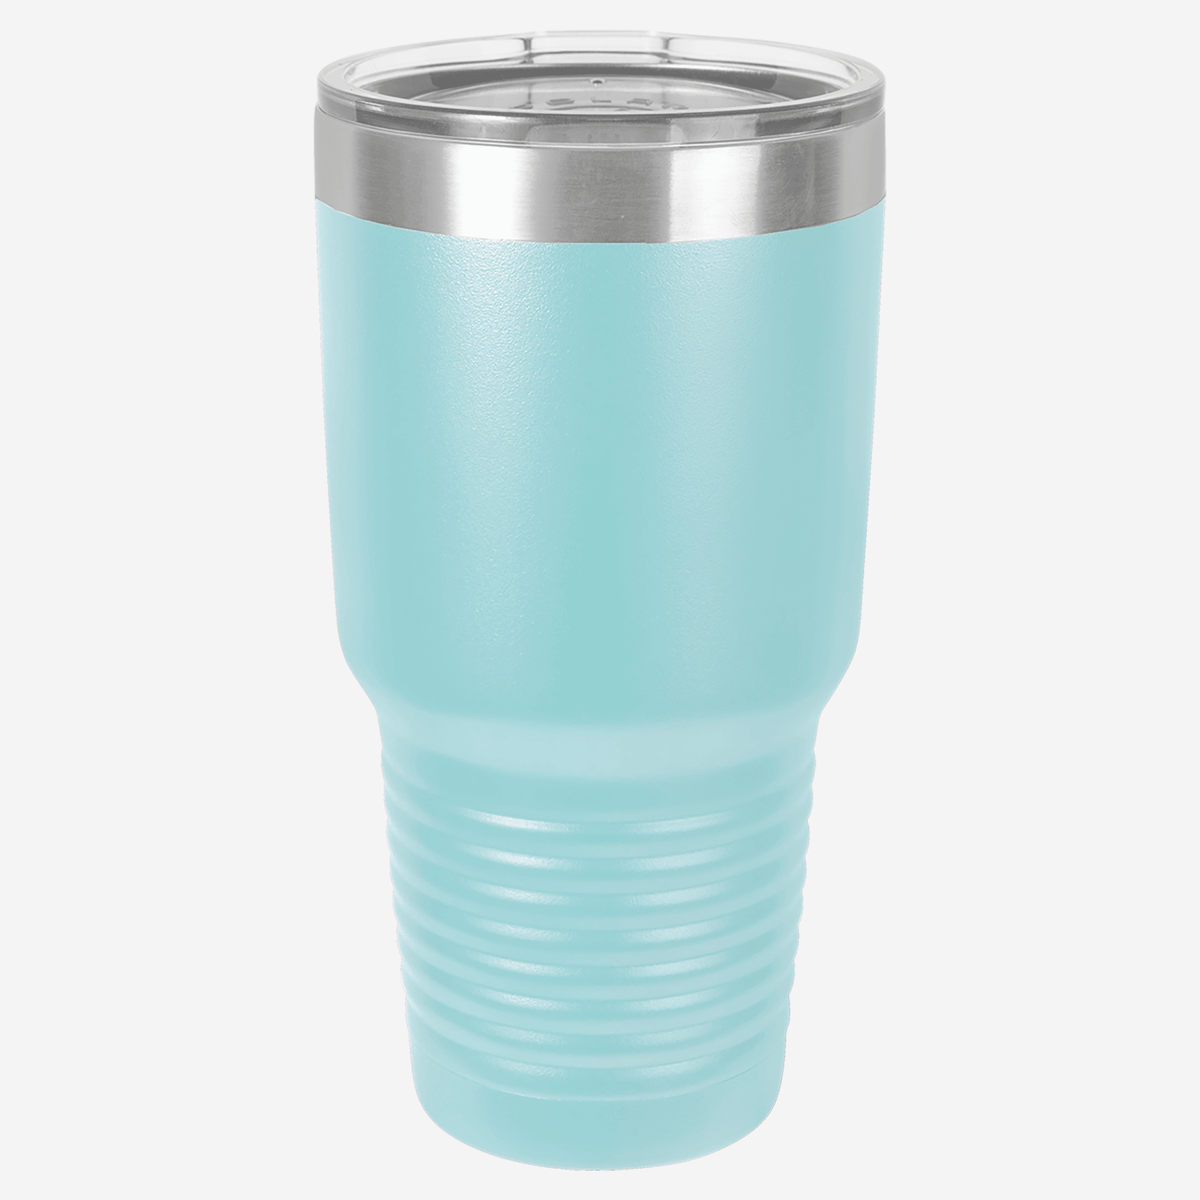 30 oz. light blue stainless steel tumbler with silver ring at top clear lid